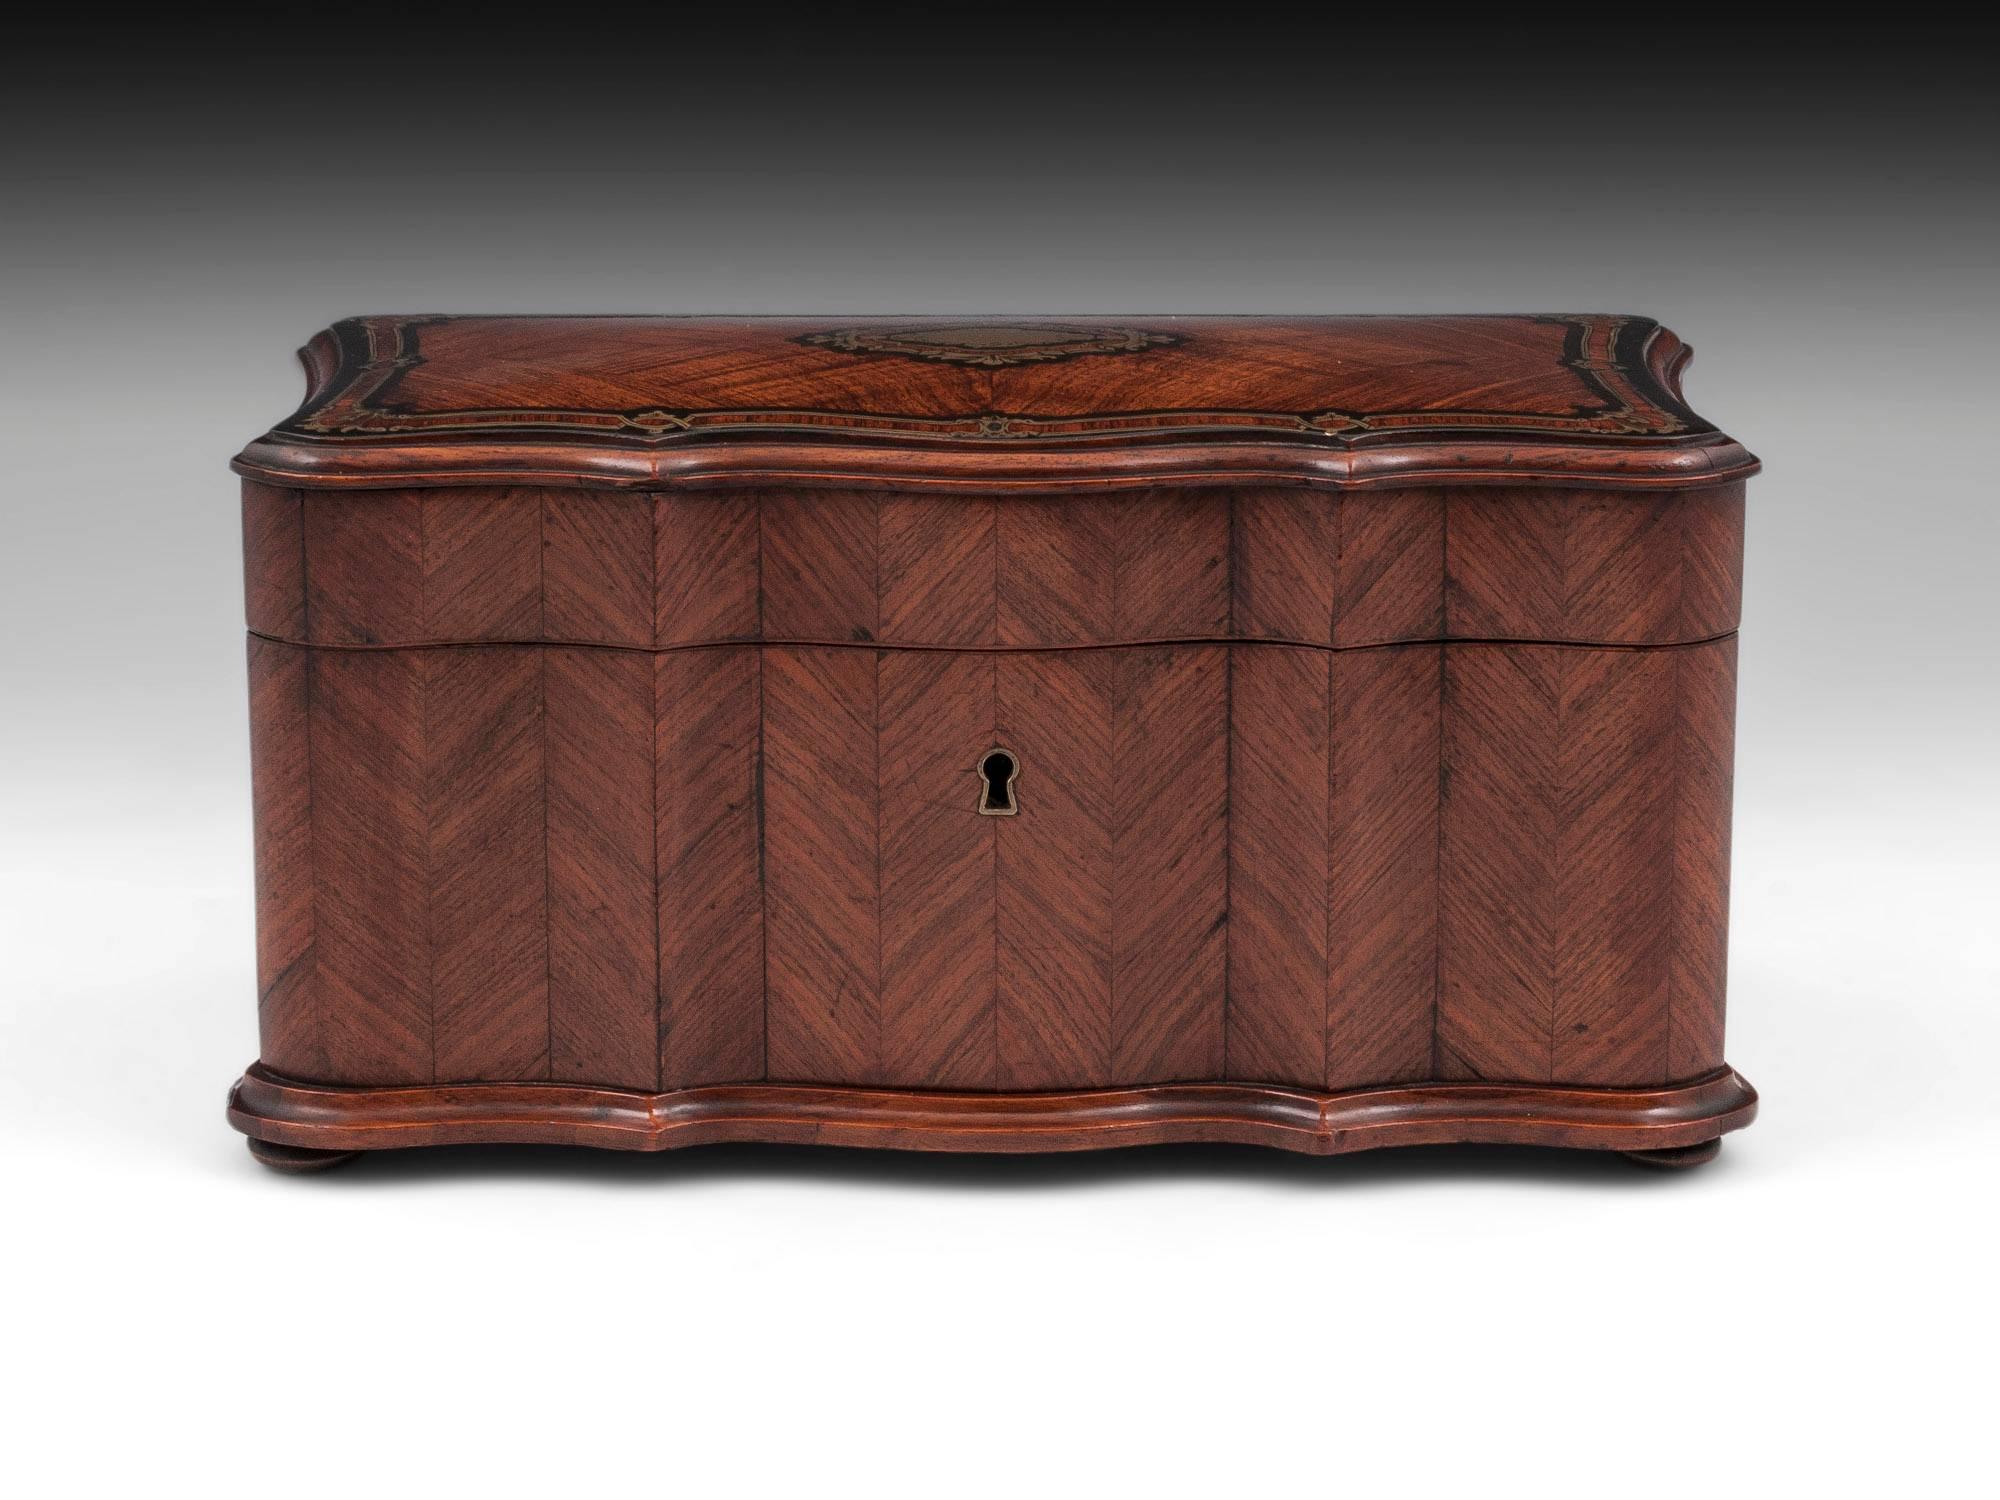 Kingwood triple serpentined tea caddy with engraved brass inlay bordering the top, including an ornate initial plate. The interior of this French tea caddy is veneered in Rosewood and features two lidded compartments with wooden handles, decorated